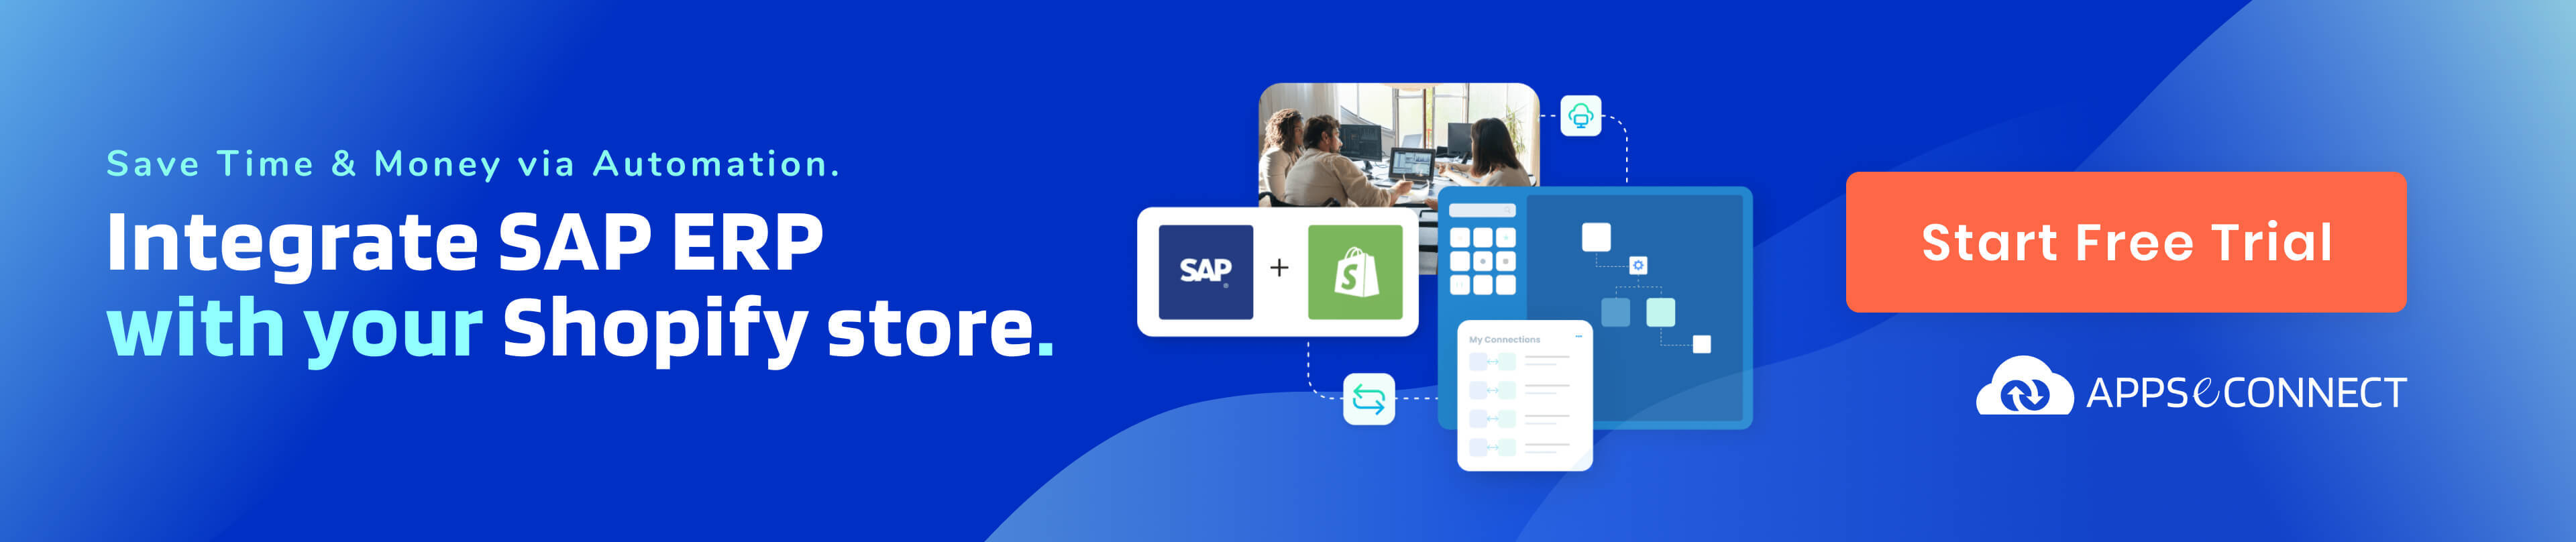 integrate-sap-erp-with-shopify-appseconnect